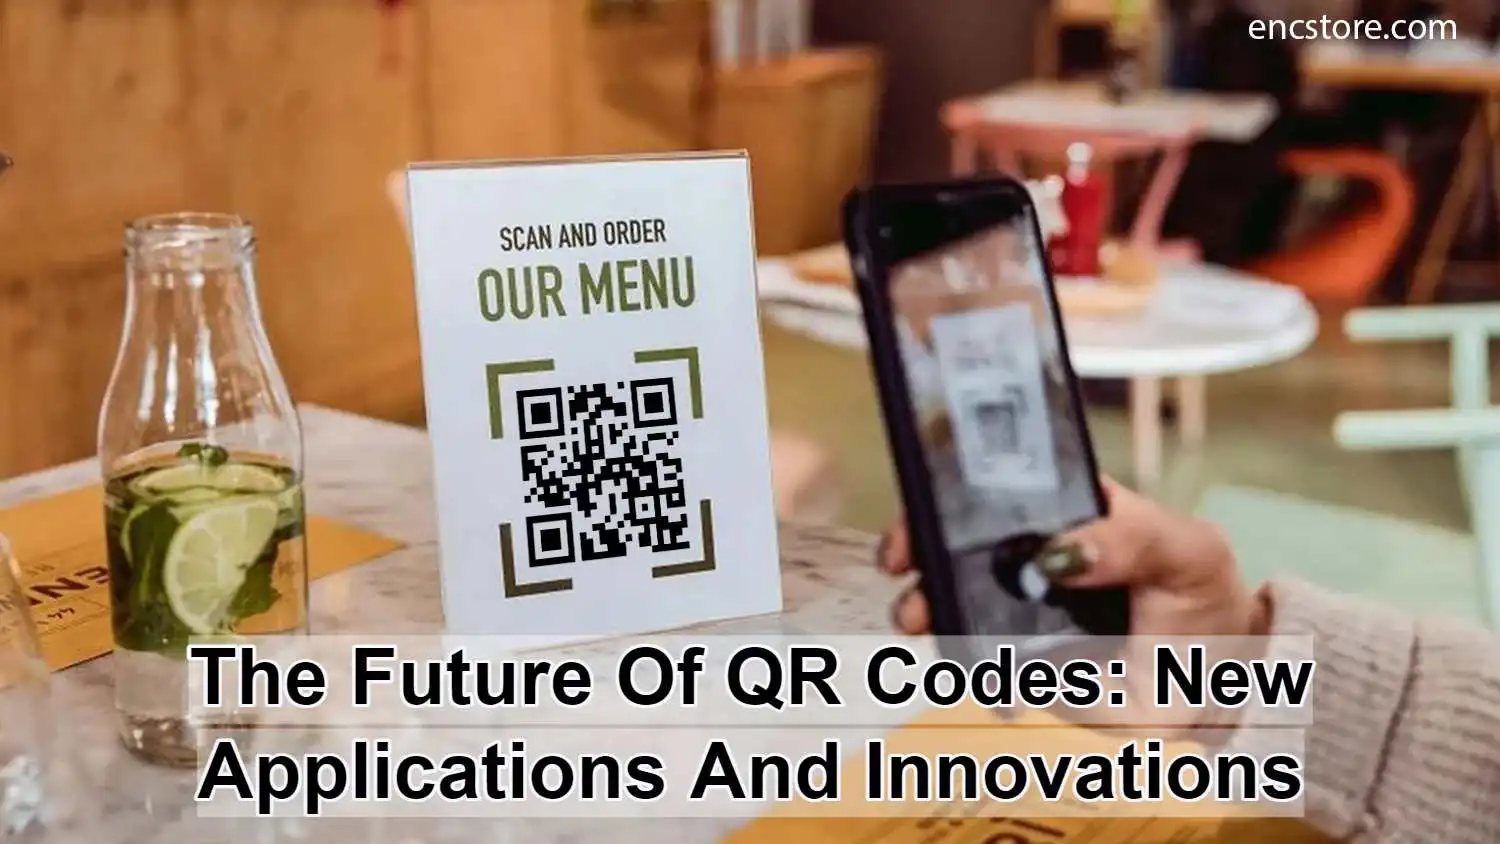 The Future Of QR Codes